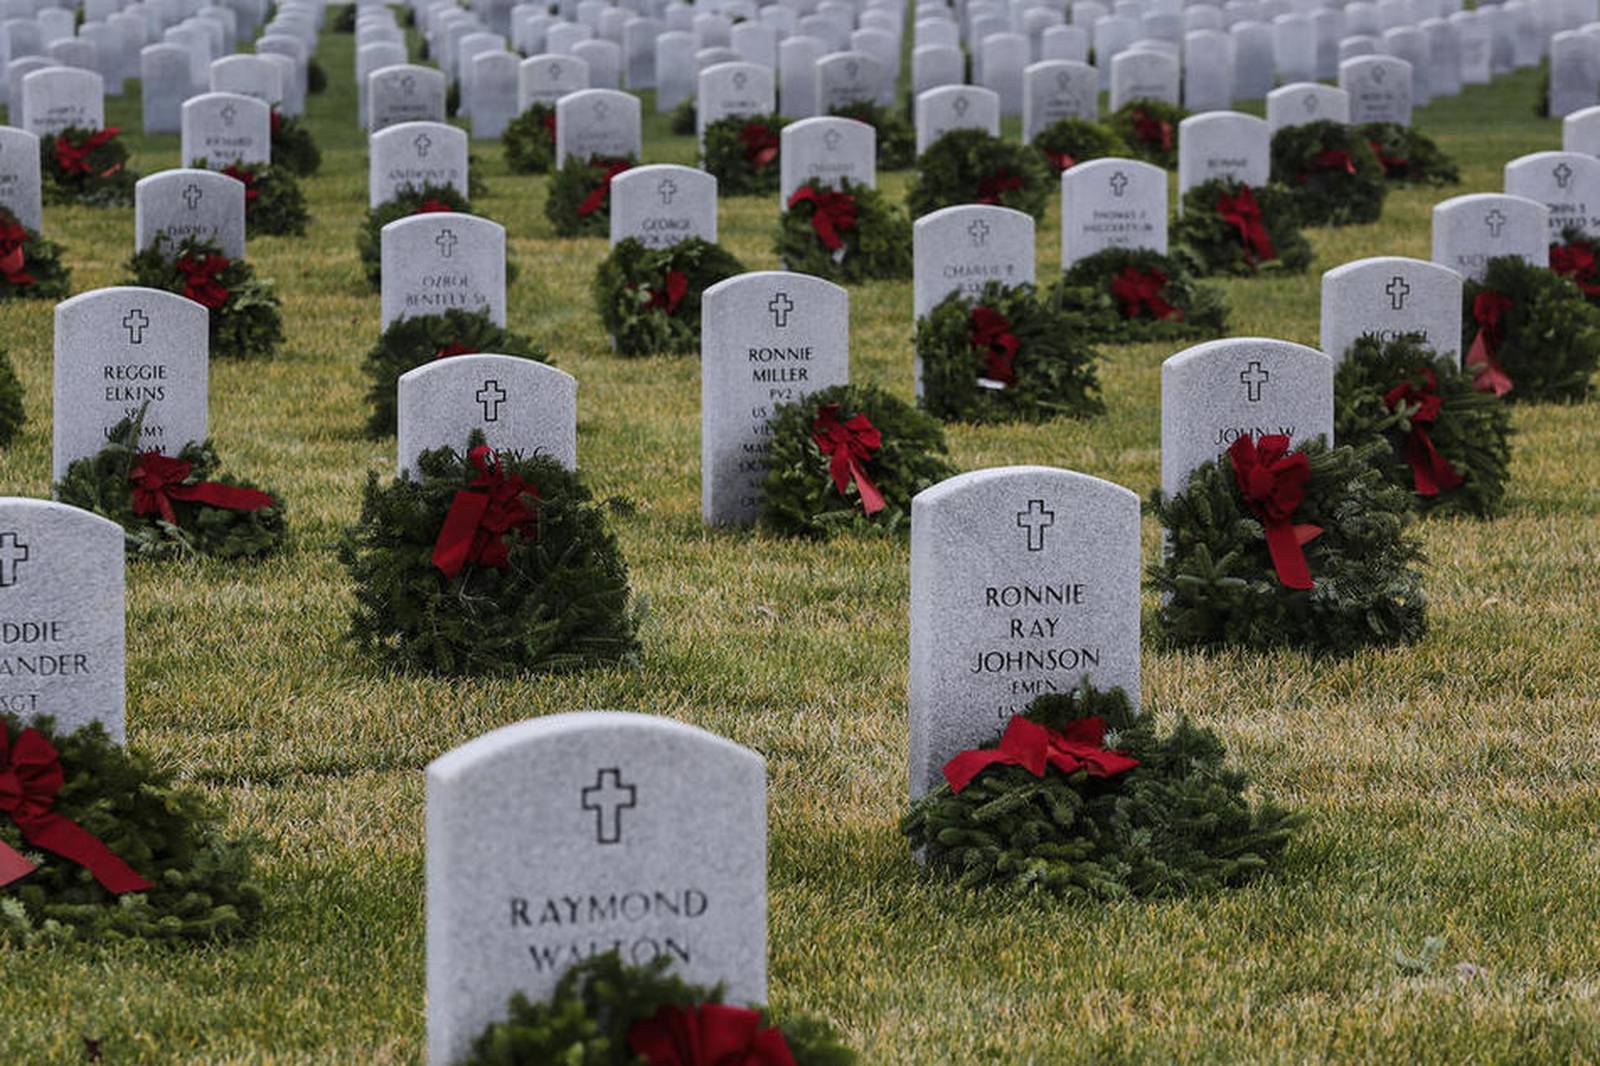 Wreaths Across America Day held at Abraham Lincoln National Cemetery in Elwood on Saturday